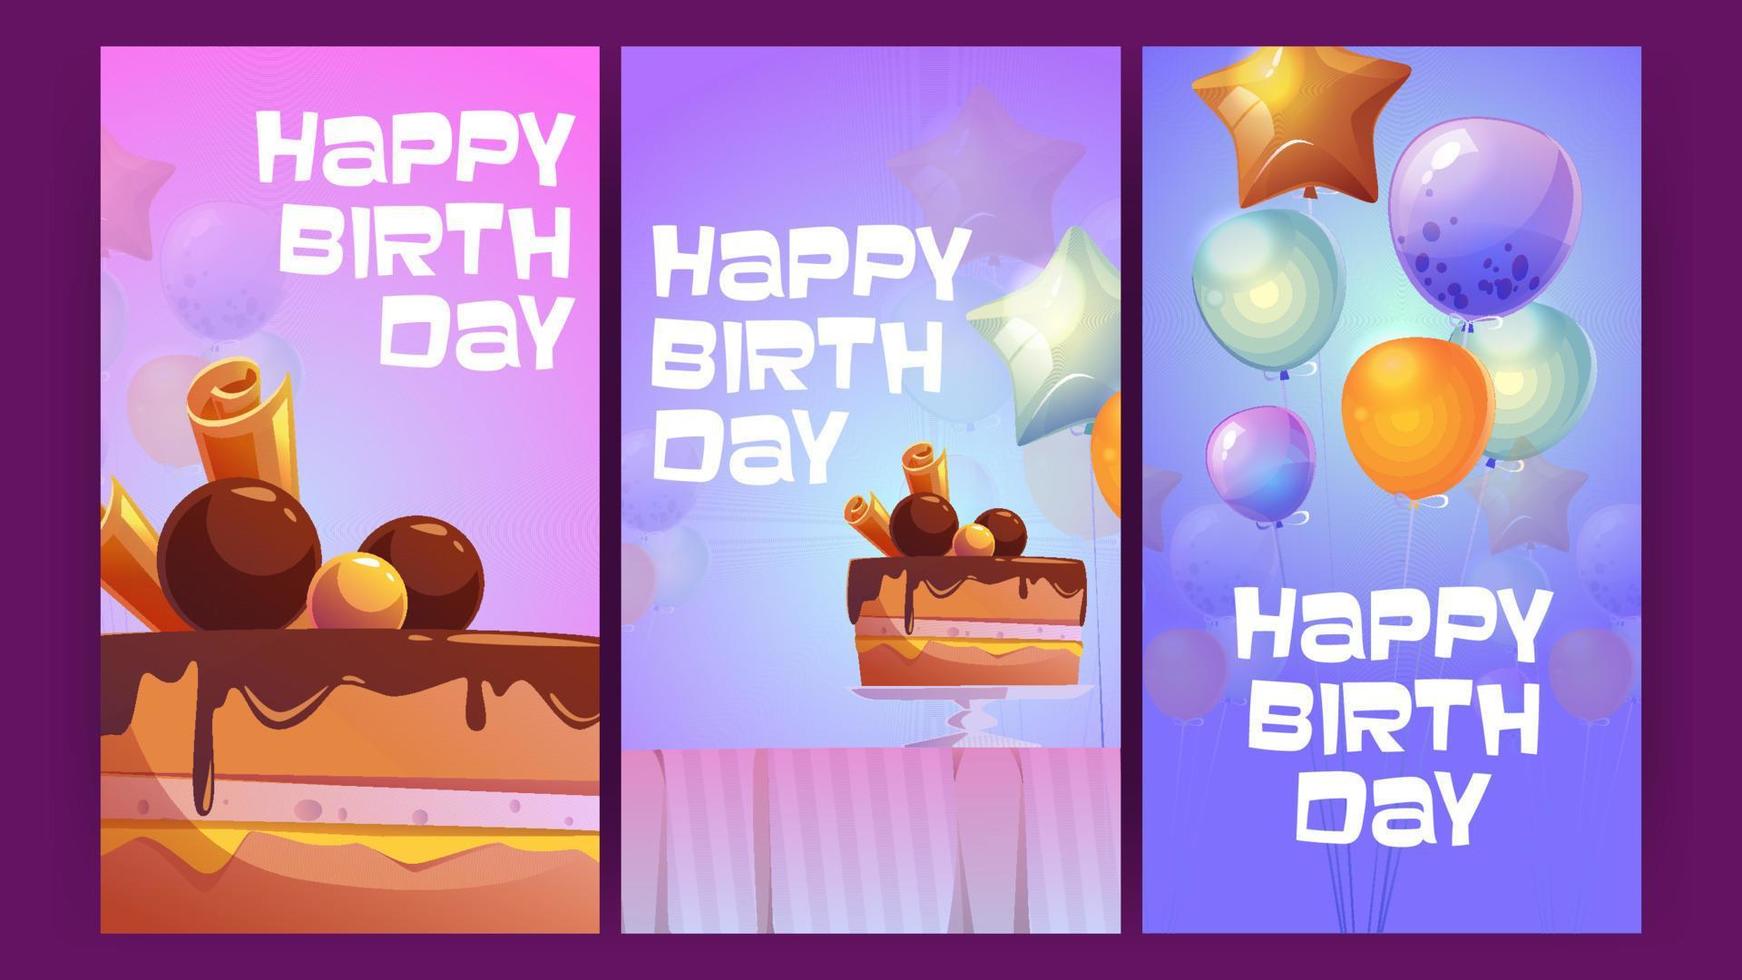 Happy birthday cards with balloons and cake vector